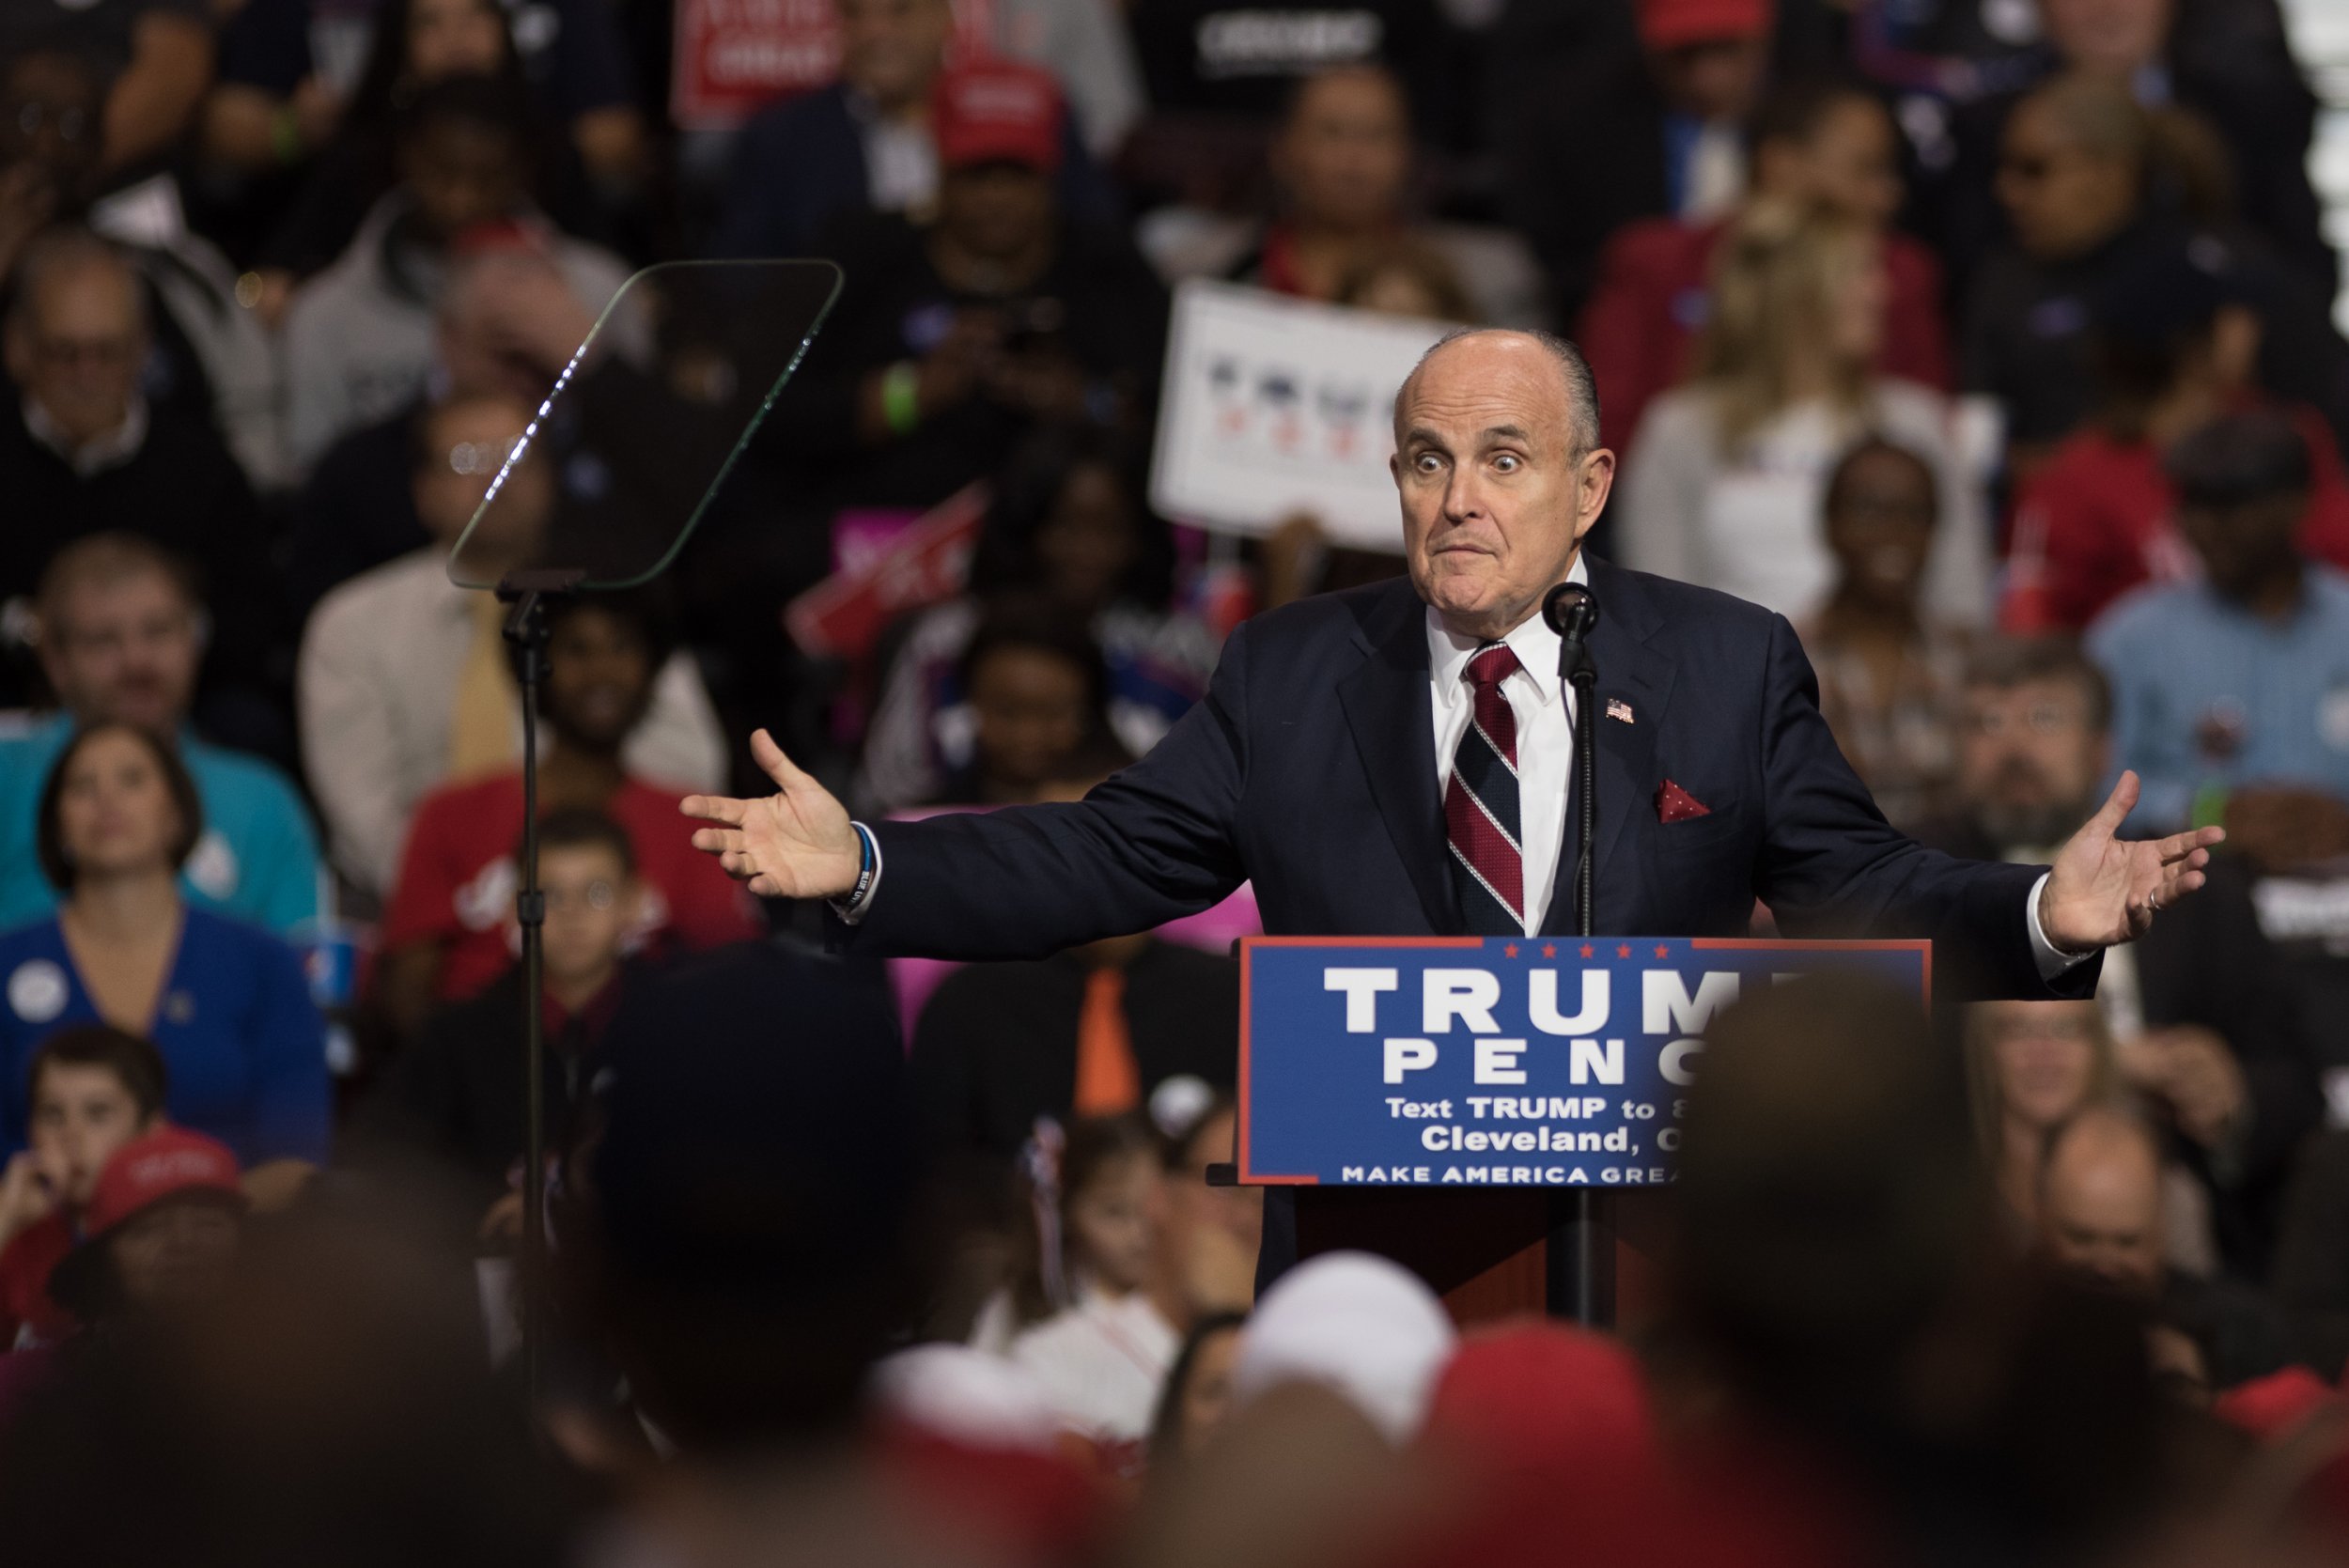 Rudy Giuliani Says Trump Staff Quoted in Woodward Book Should ‘Get Another Job’